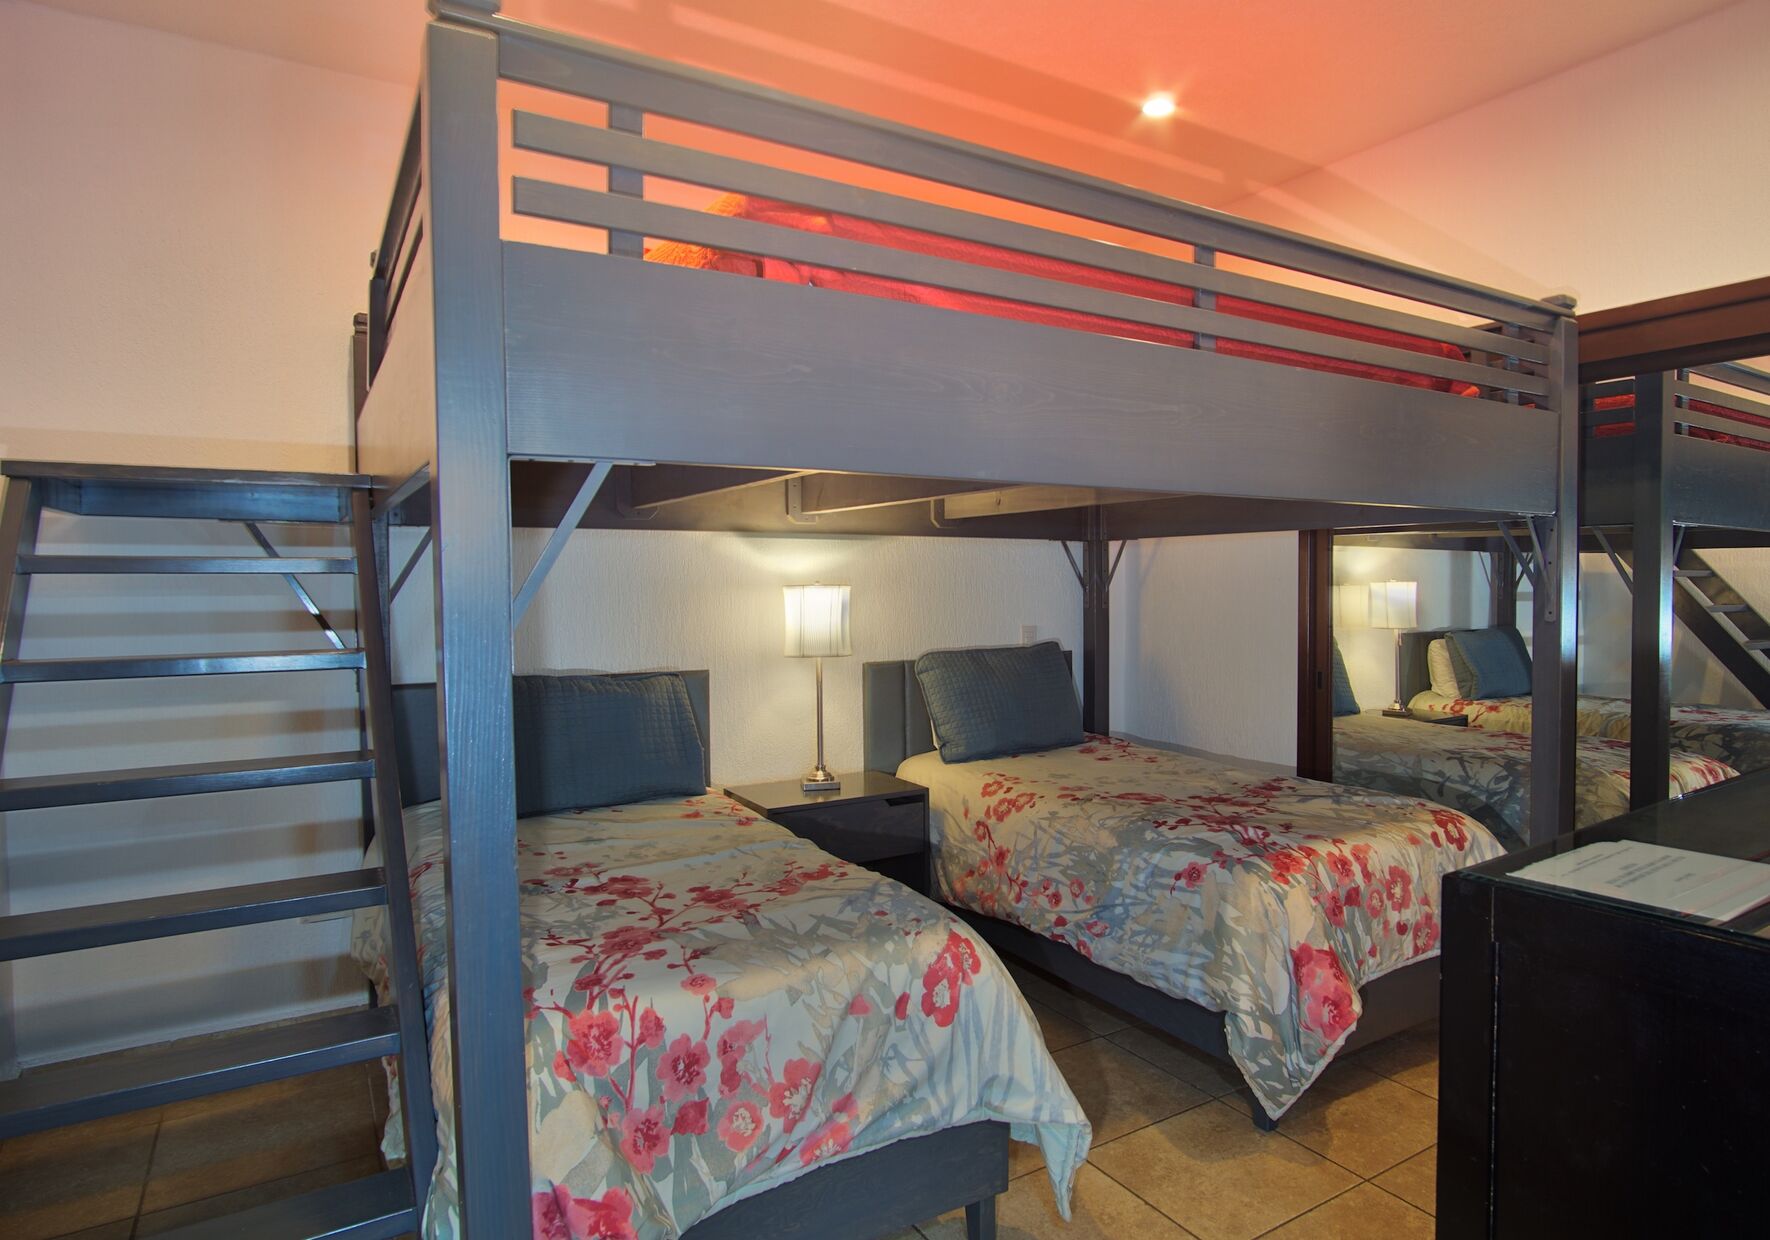 THe guest bedroom has a custom bunk bed with 2 twin beds, and a large king bed above.